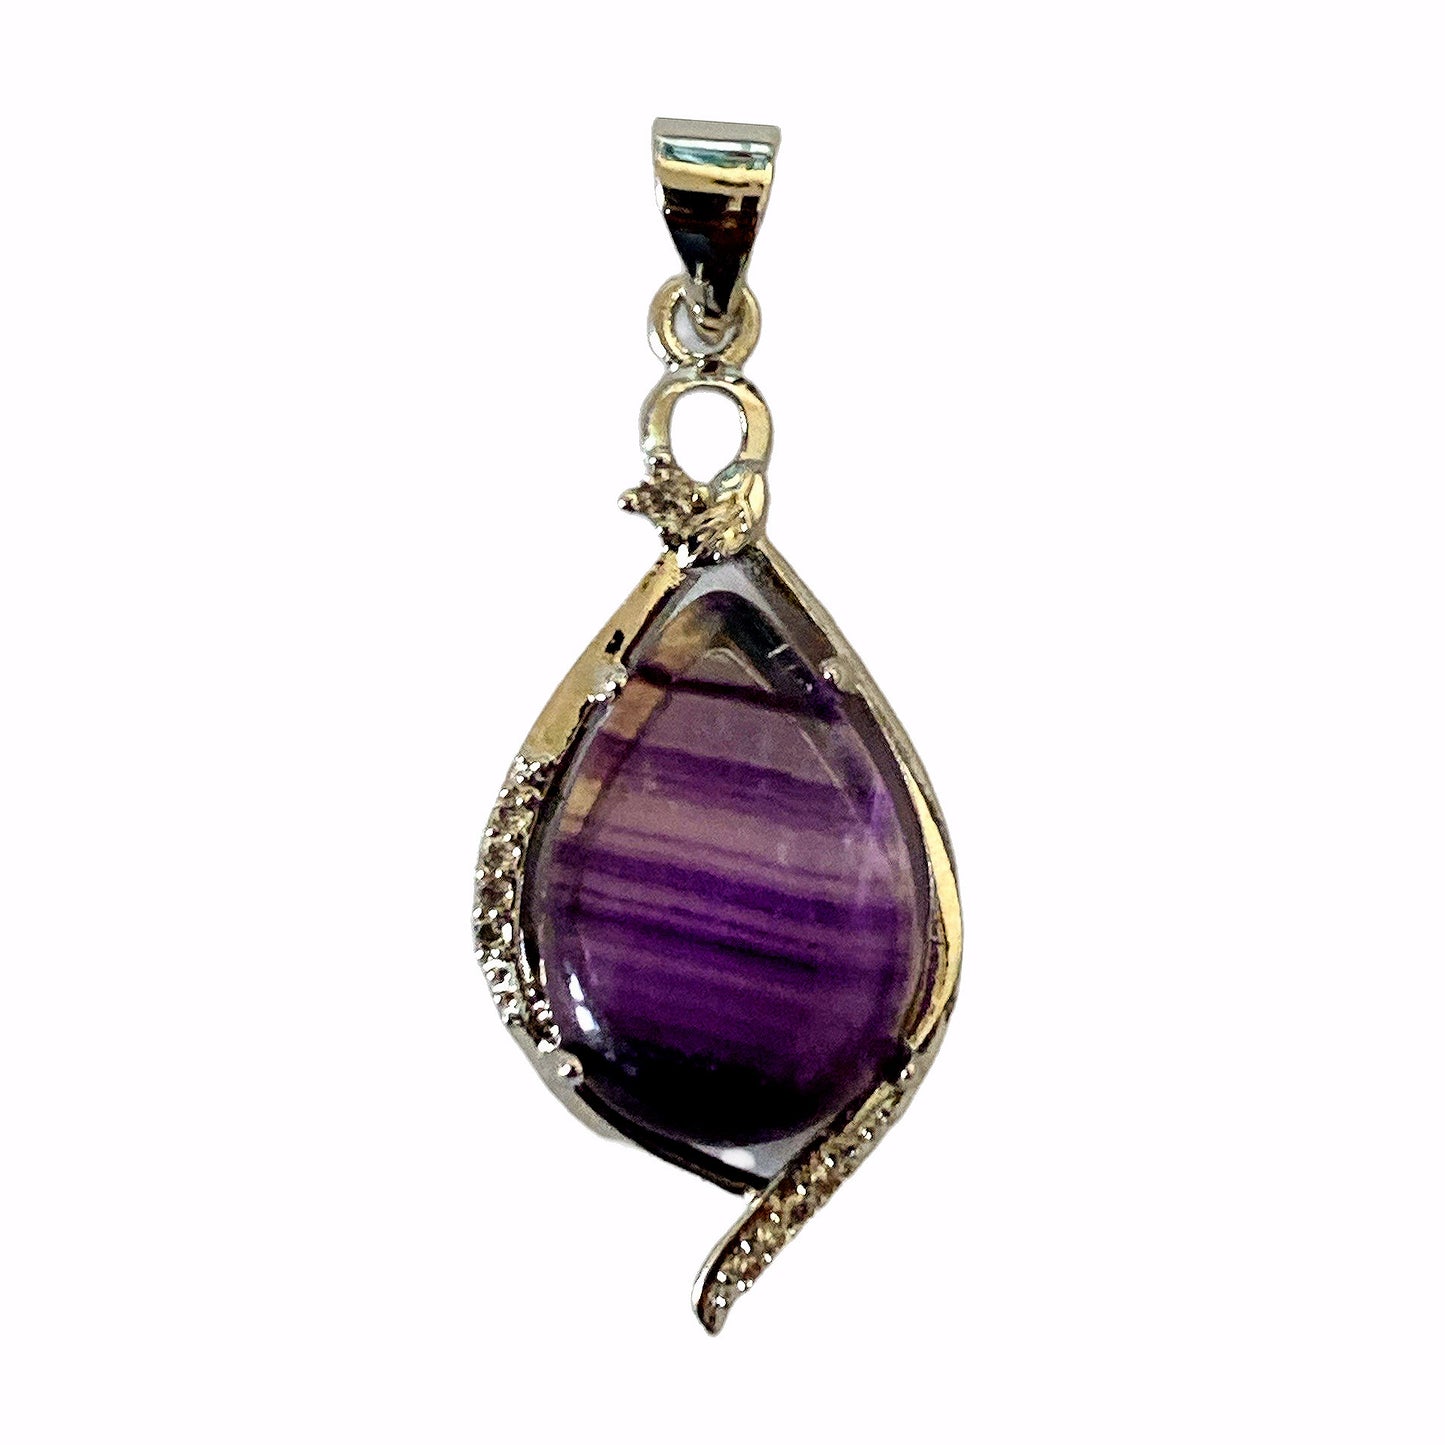 Fluorite Tear Pendant with Rhinestones - Silver Color Plated Metal - 32x12mm - China - NEW922